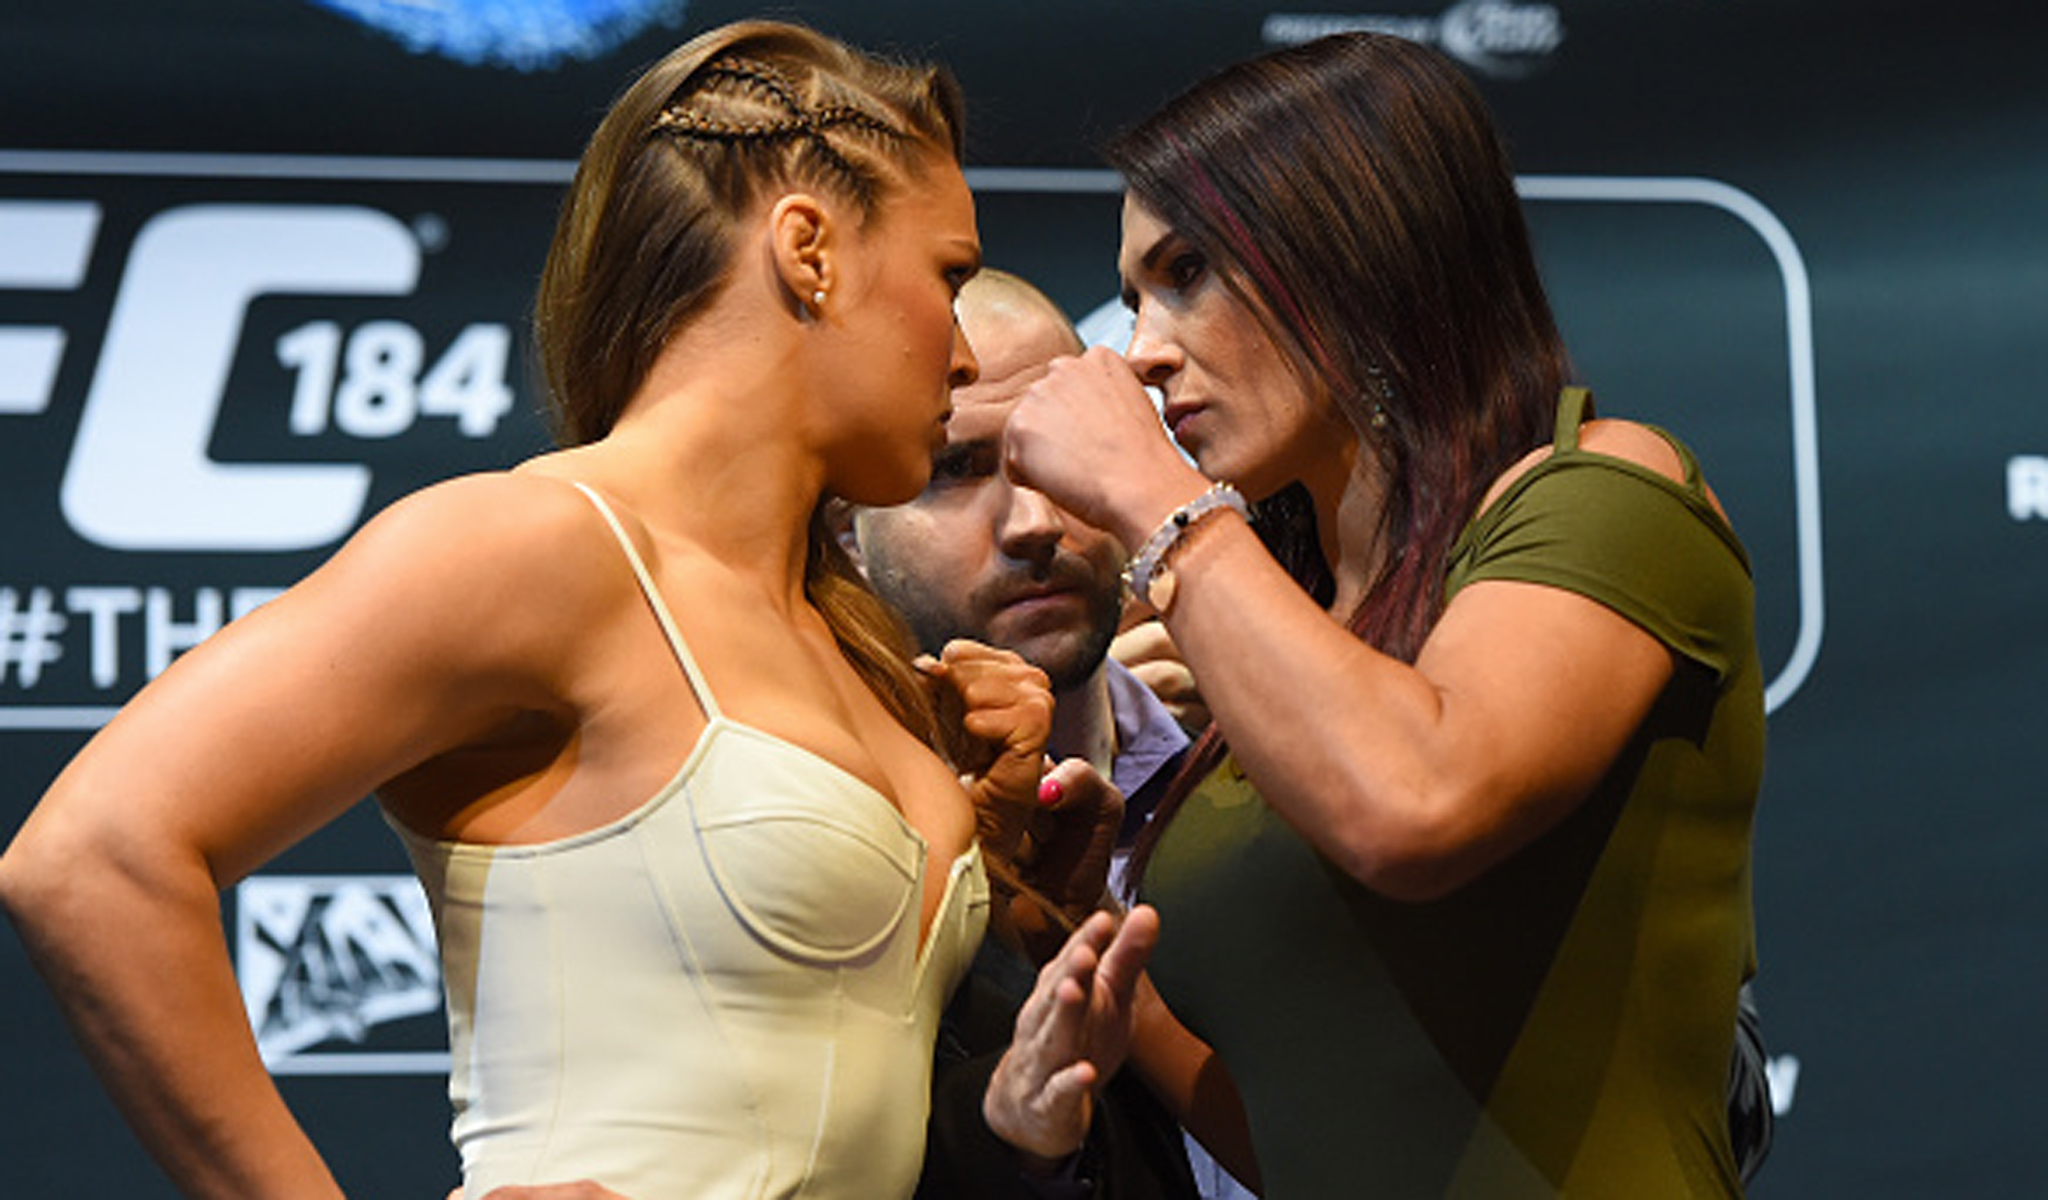 Ufc 184 Weigh In Results Ronda Rousey Cat Zingano On Mark For Main Event Mma Sporting News